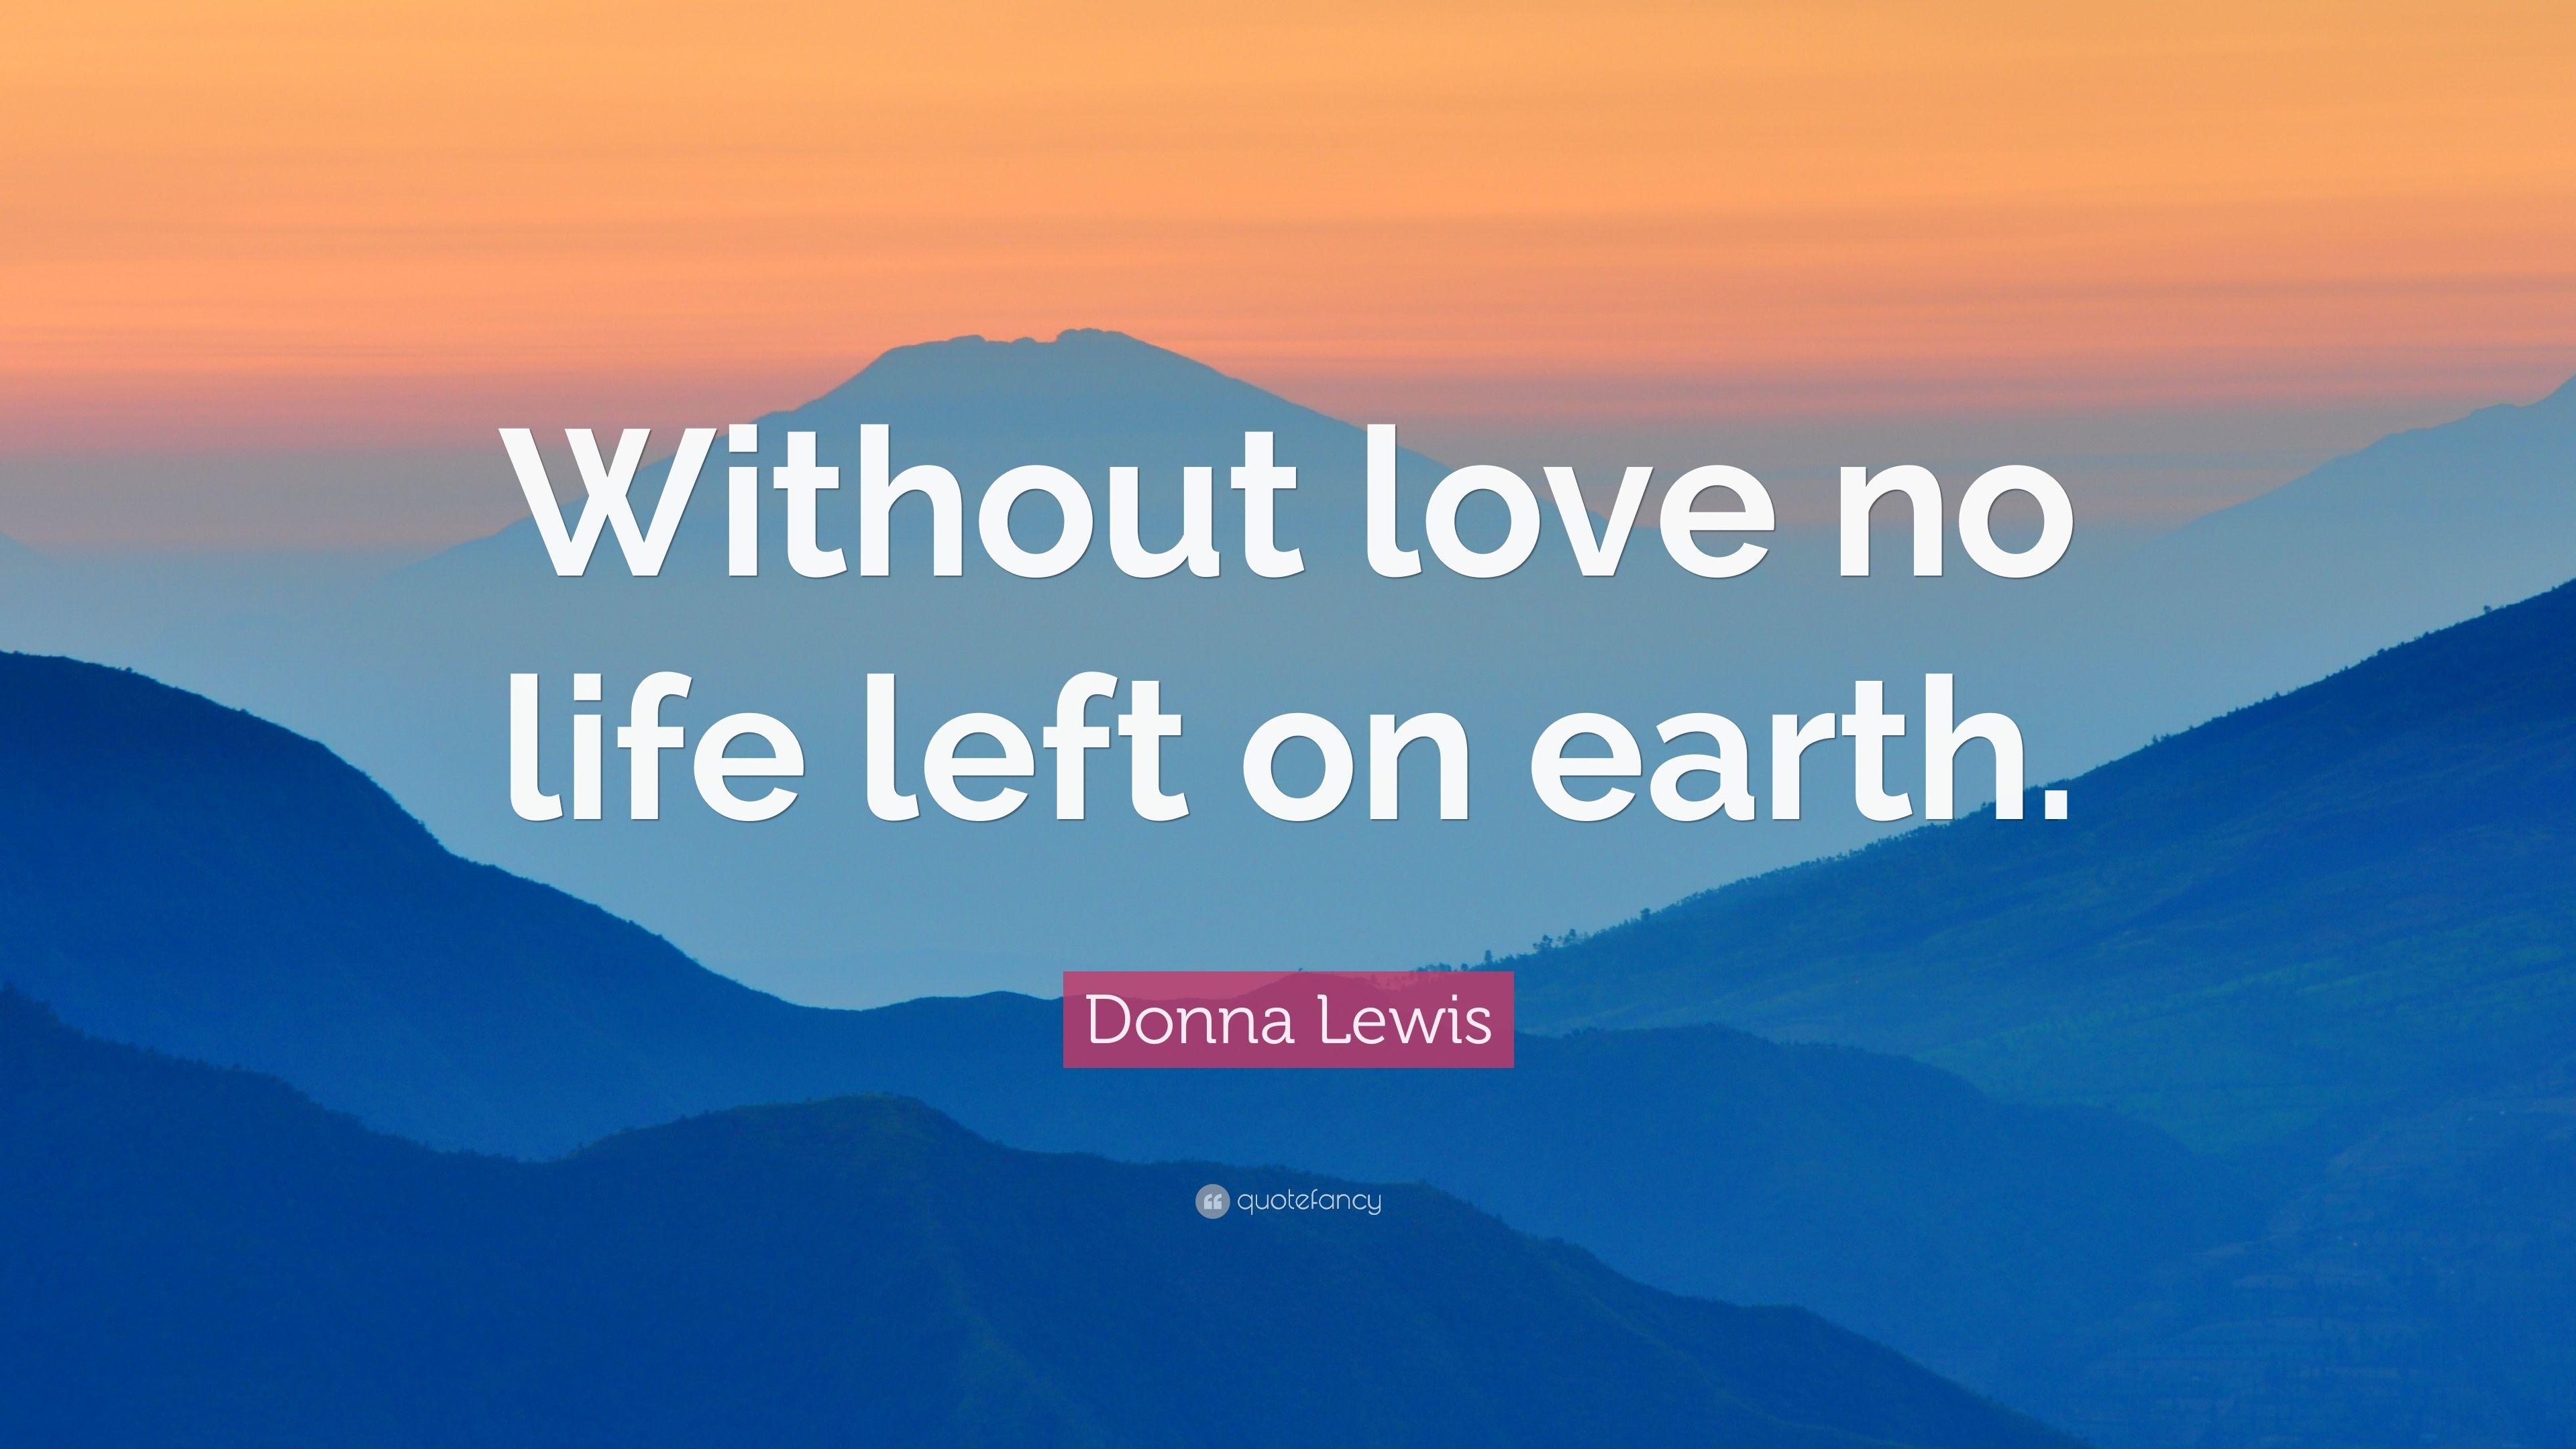 Donna Lewis Quote: “Without love no life left on earth.” 7